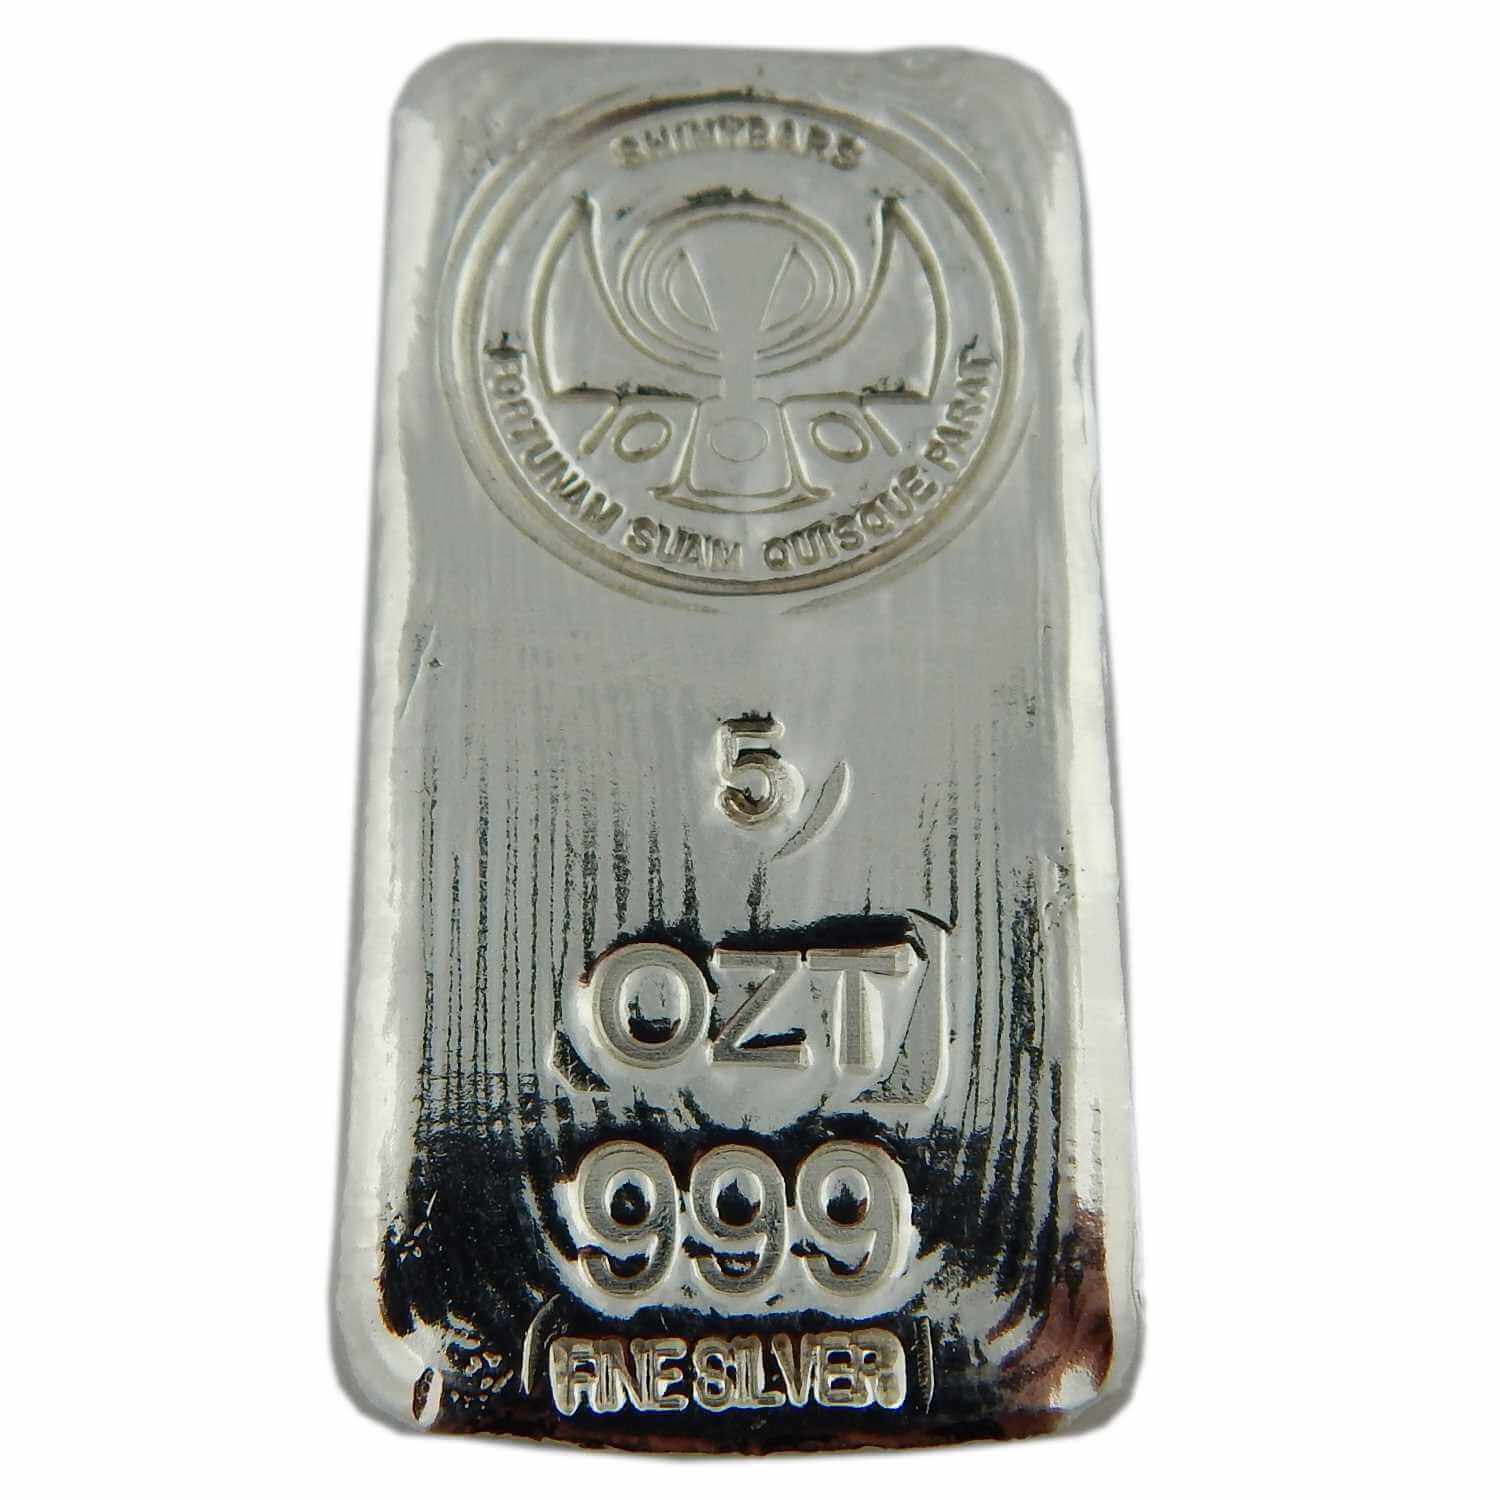 5oz hand poured silver bar the brick by ShinyBars